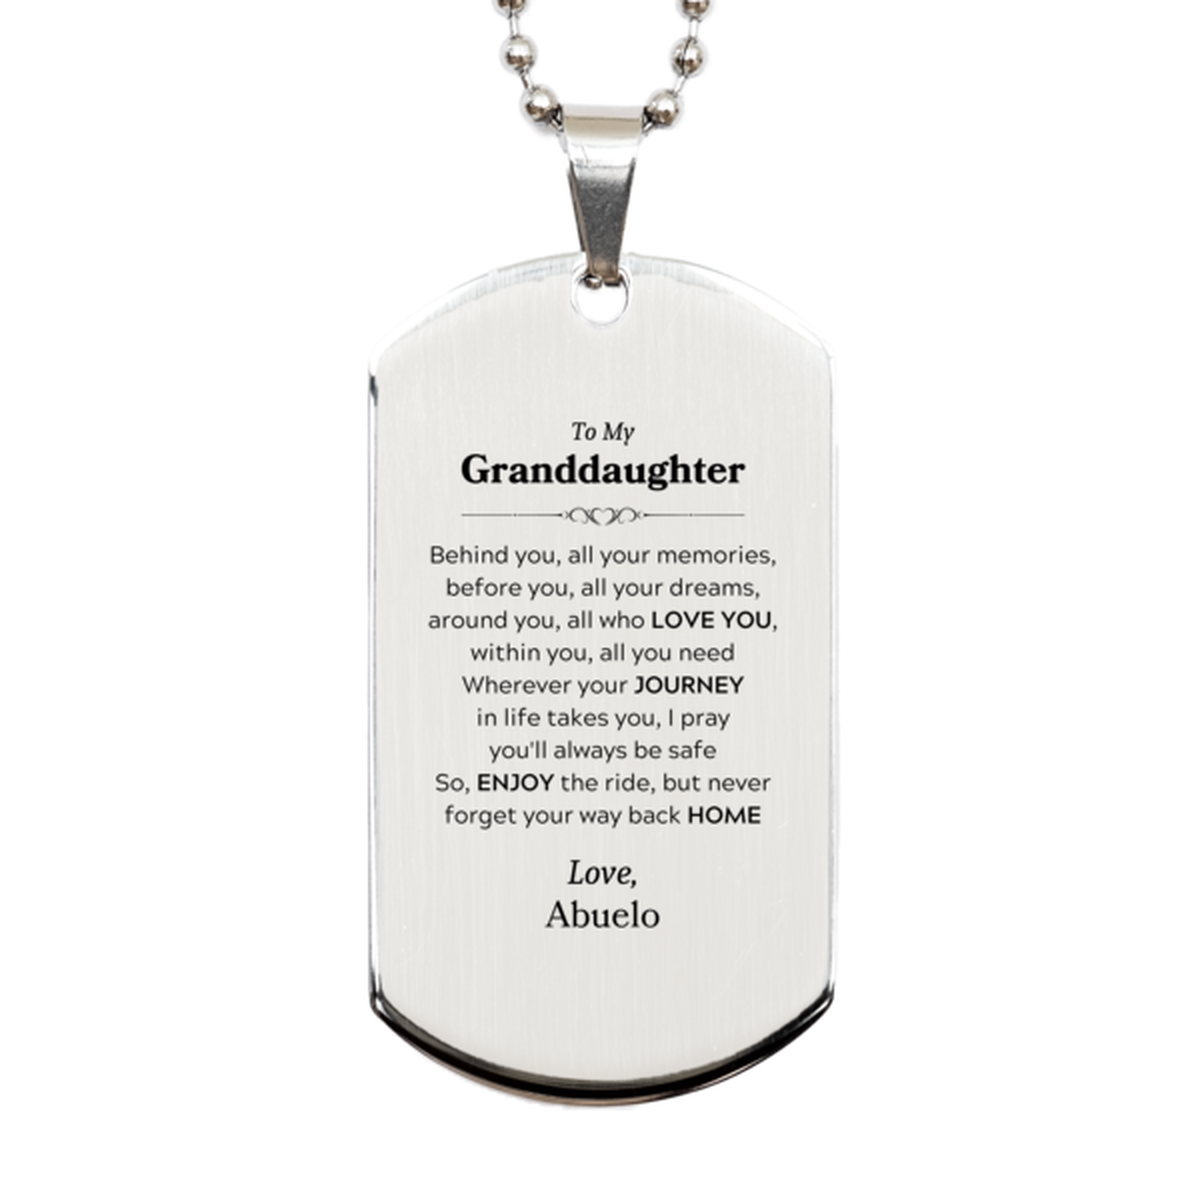 To My Granddaughter Graduation Gifts from Abuelo, Granddaughter Silver Dog Tag Christmas Birthday Gifts for Granddaughter Behind you, all your memories, before you, all your dreams. Love, Abuelo